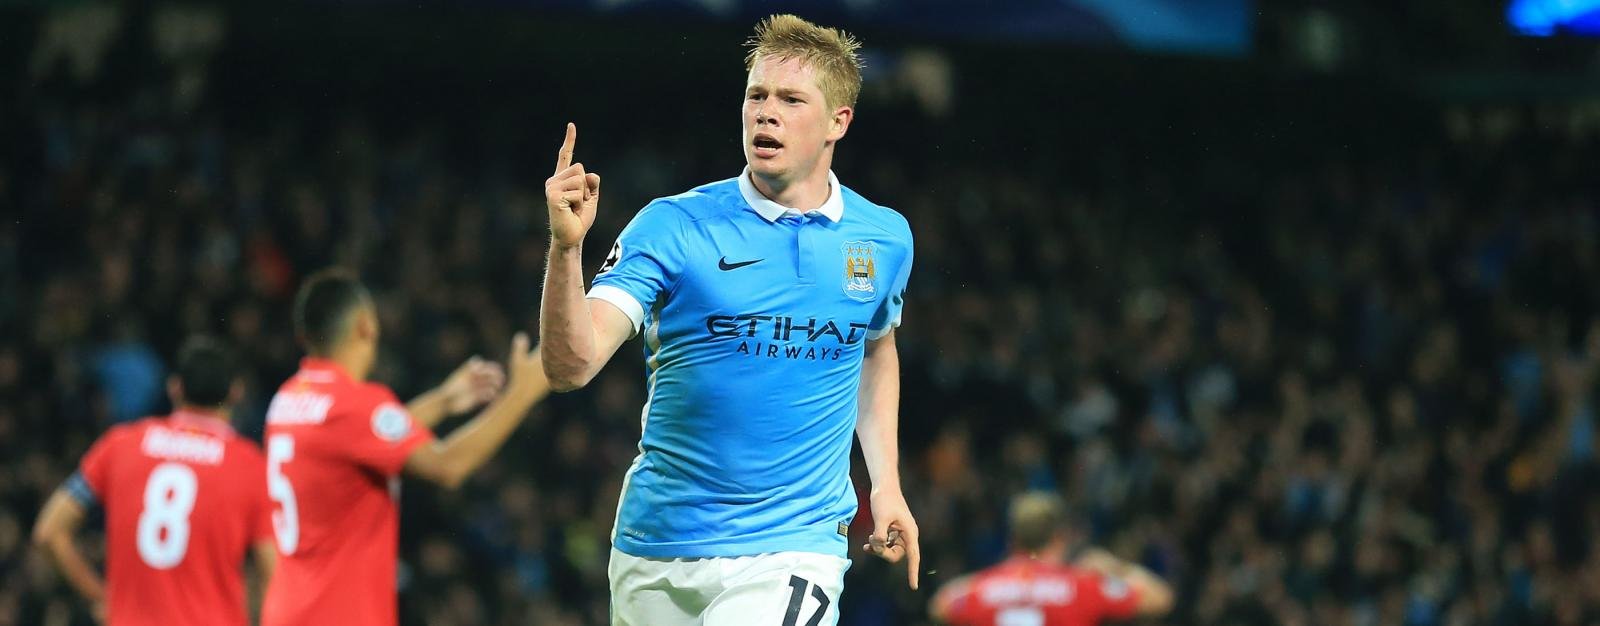 Round-up: Champions League – City grab late winner to see off Sevilla